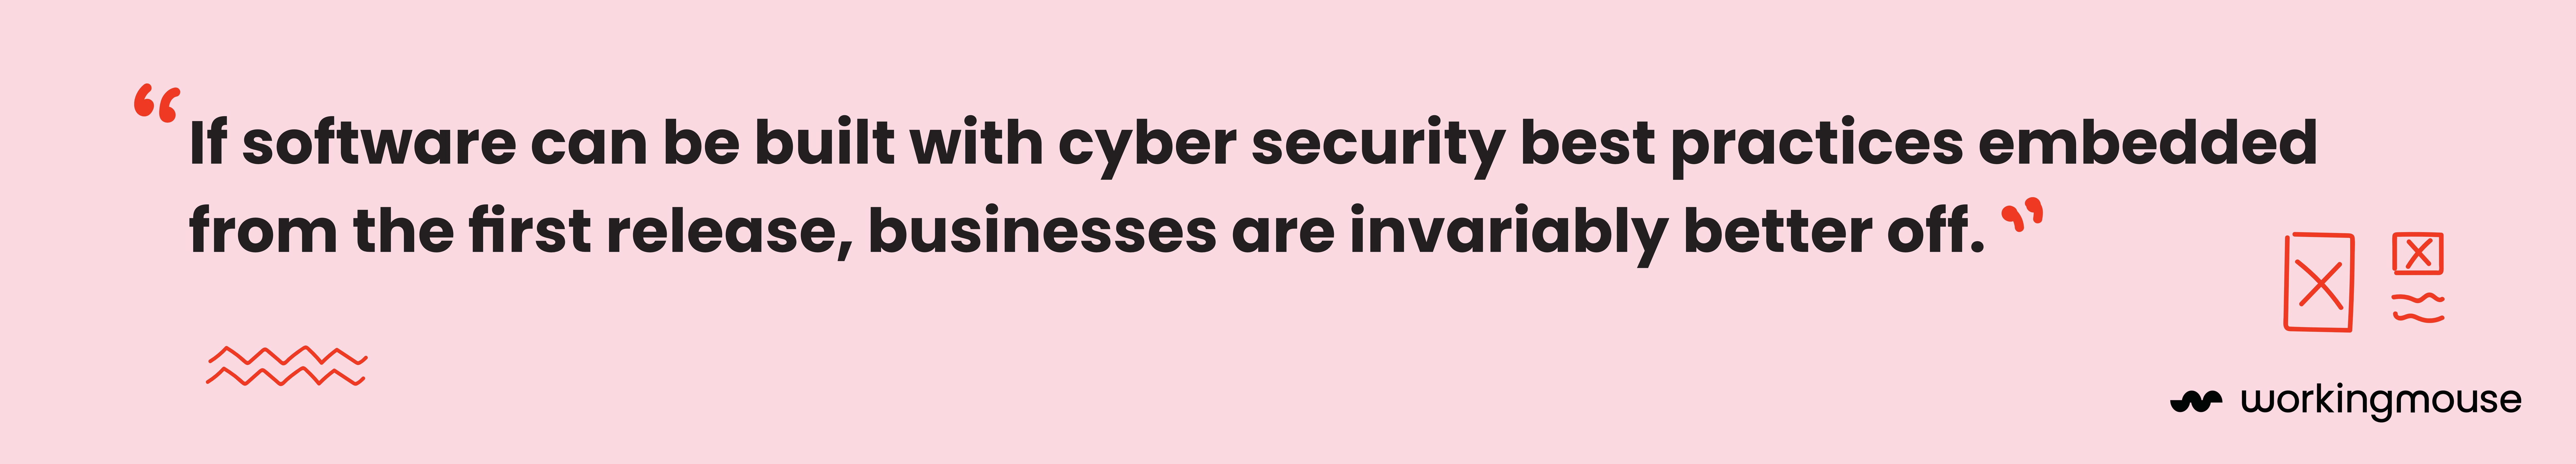 This is a quote block saying the following: If software can be built with cyber security best practices embedded from the first release, businesses are invariably better off.